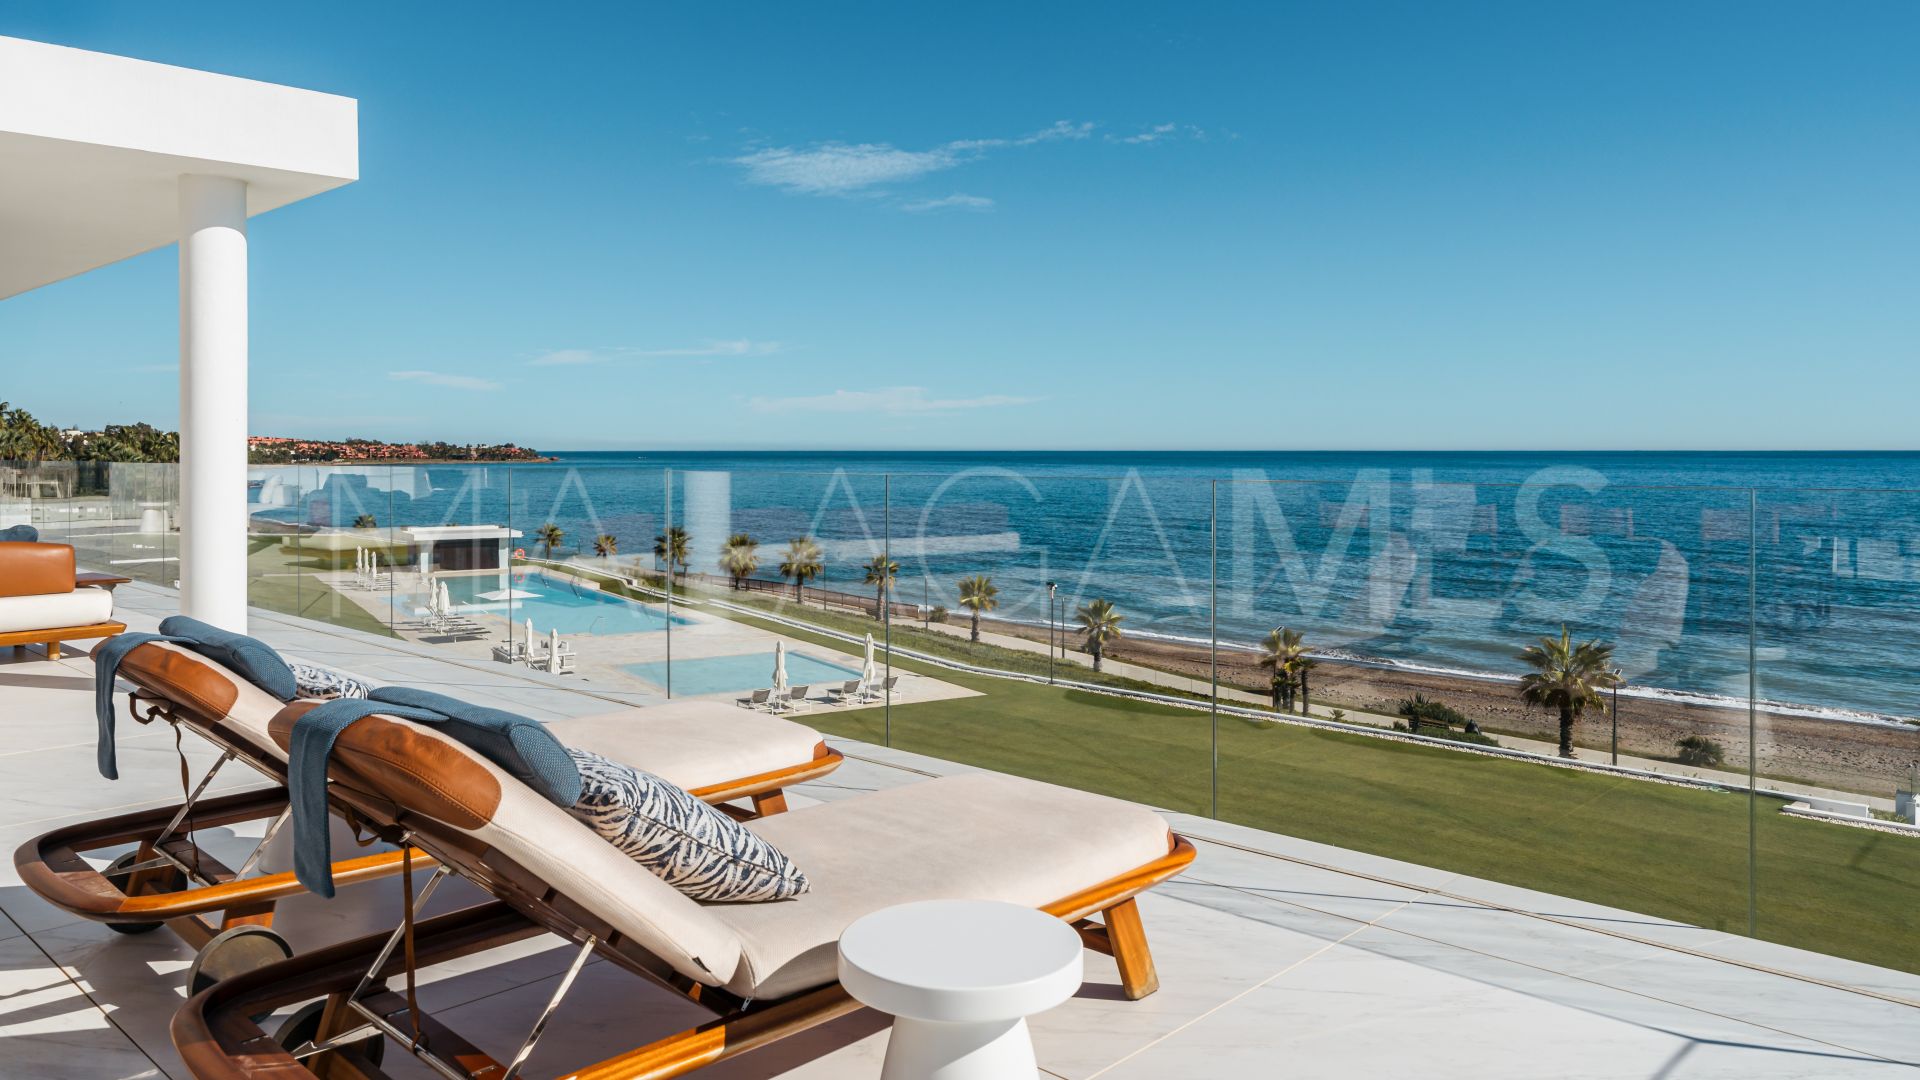 4 bedrooms penthouse in Emare for sale